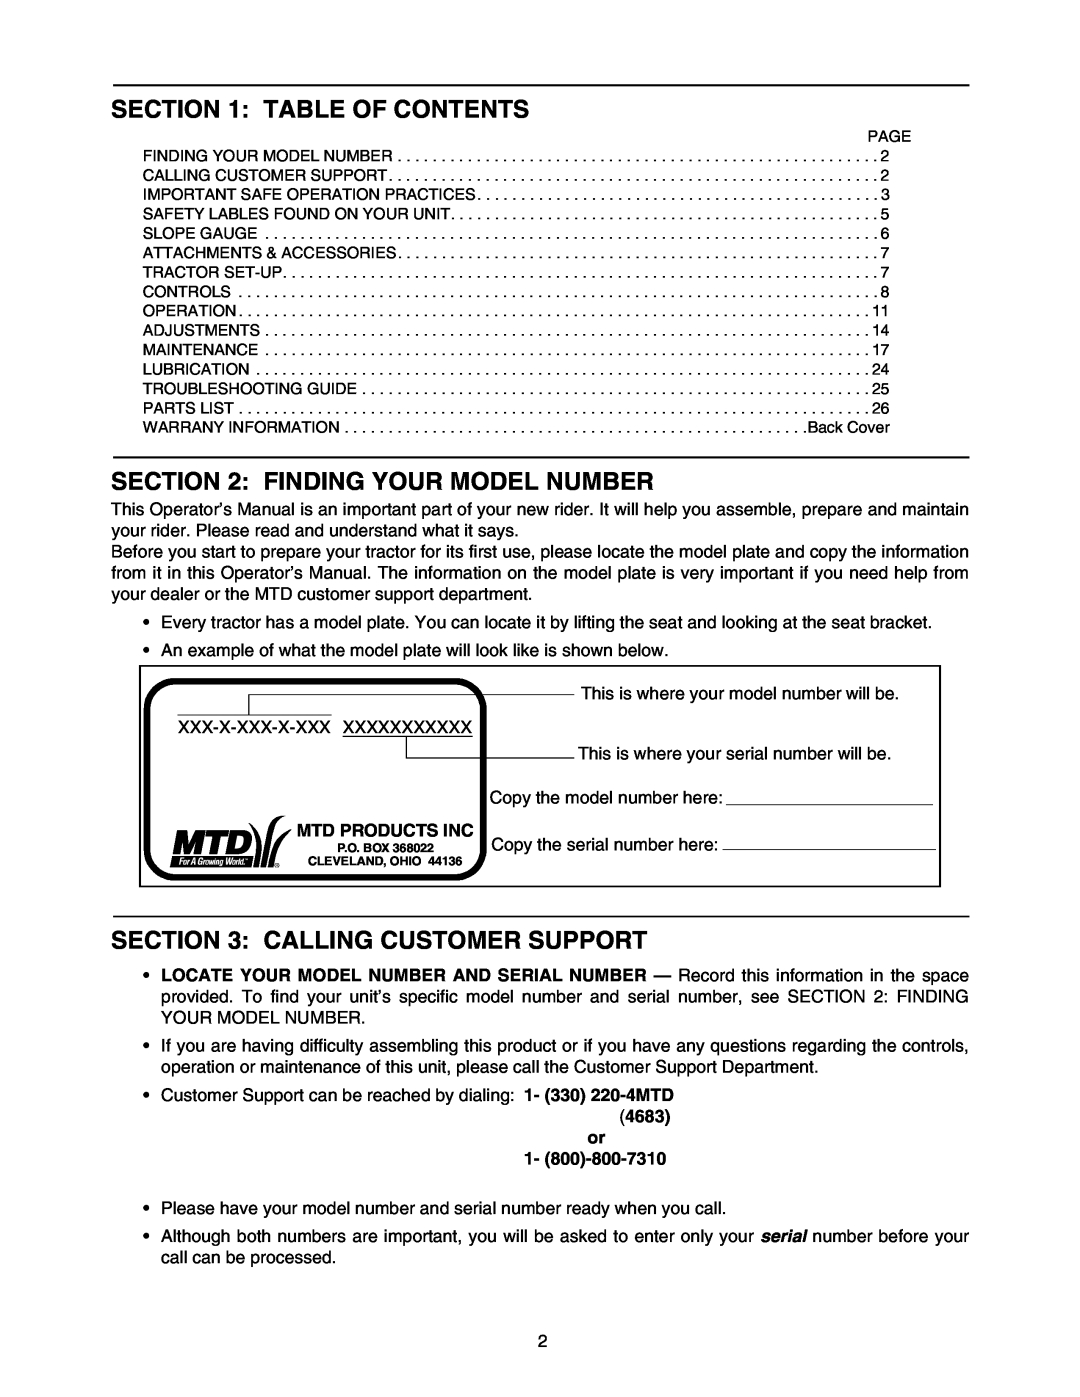 Yard-Man 604 manual Table Of Contents, Finding Your Model Number, Calling Customer Support, Mtd Products Inc, 4683 or 